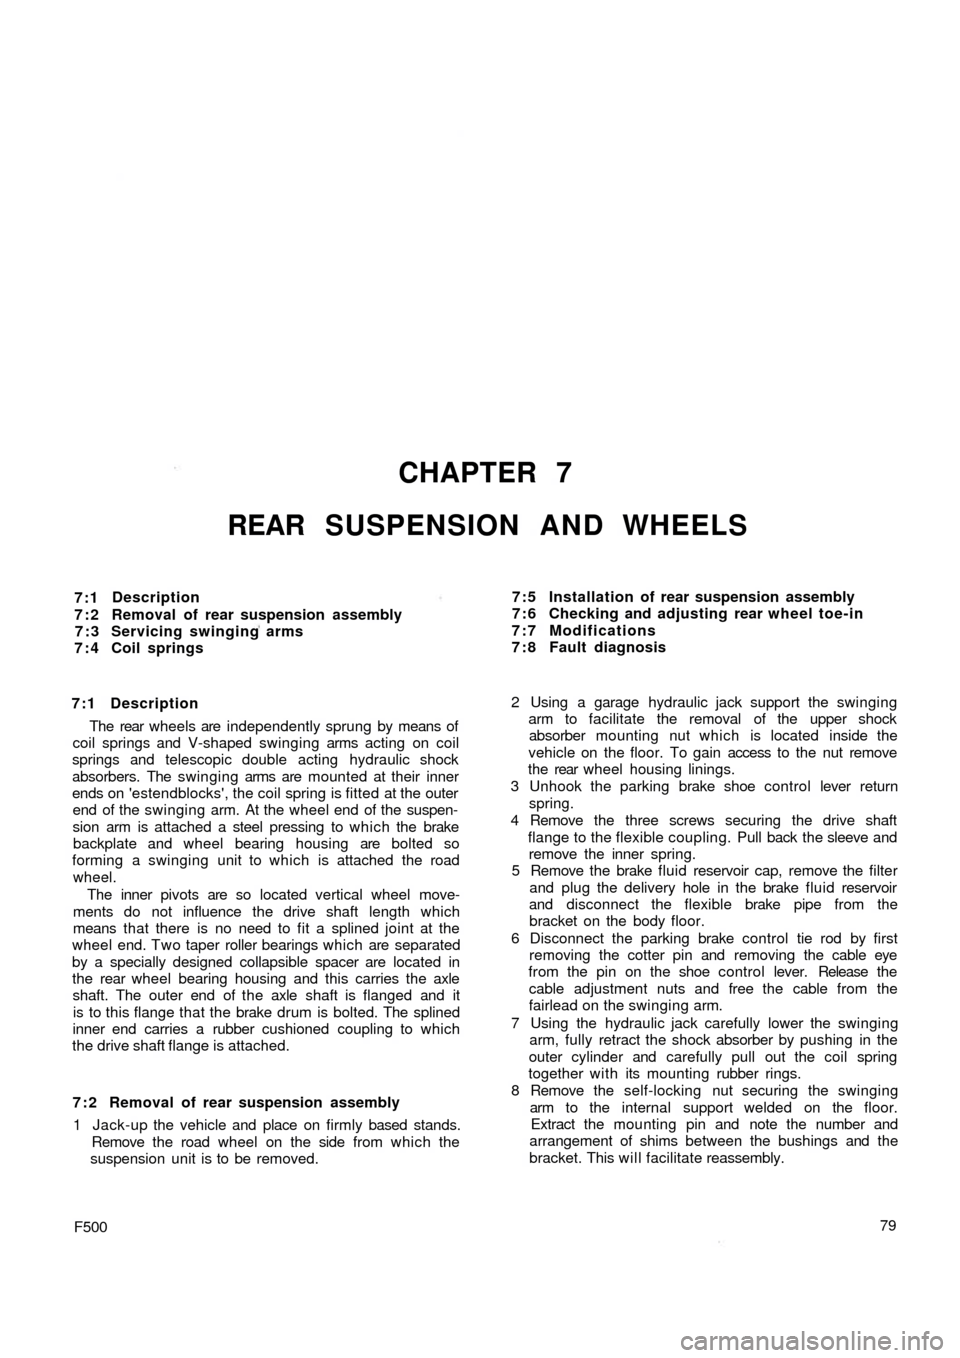 FIAT 500 1957 1.G Workshop Manual CHAPTER 7
REAR SUSPENSION AND WHEELS
7:1
7:2
7:3
7:4Description
Removal of rear suspension assembly
Servicing swinging arms
Coil springs
7:1 Description
The  rear  wheels are independently sprung by m